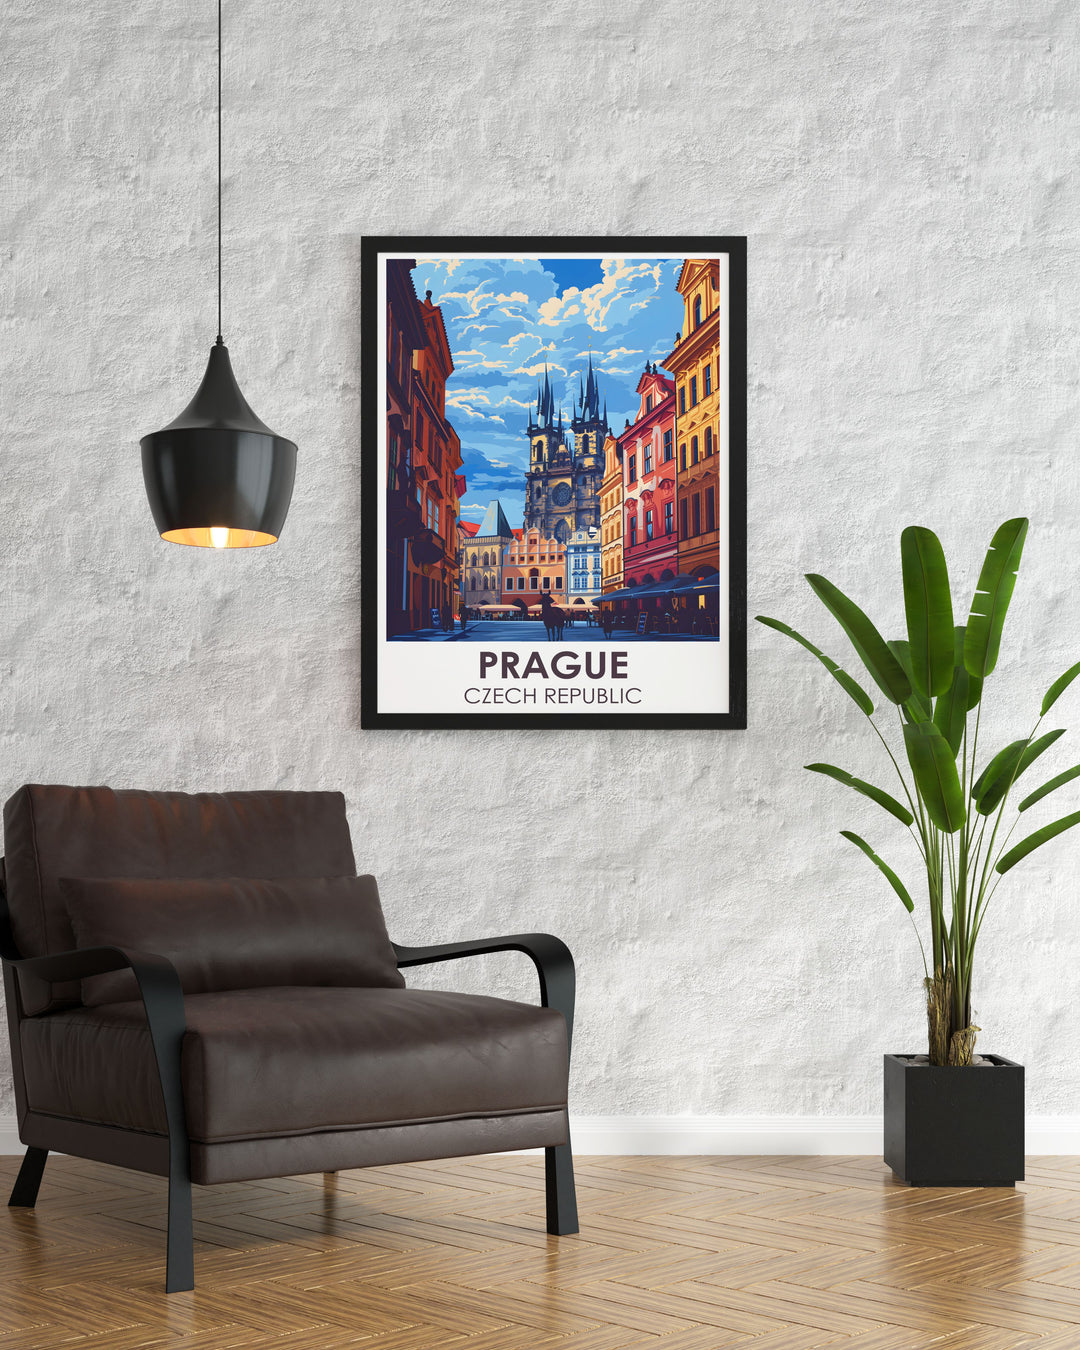 Enhance your home decor with an Old Town Square Travel Poster. This Prague Wall Art is perfect for showcasing the beauty of the Czech Republic. The detailed illustration makes it an excellent piece for any Prague Home Decor collection.